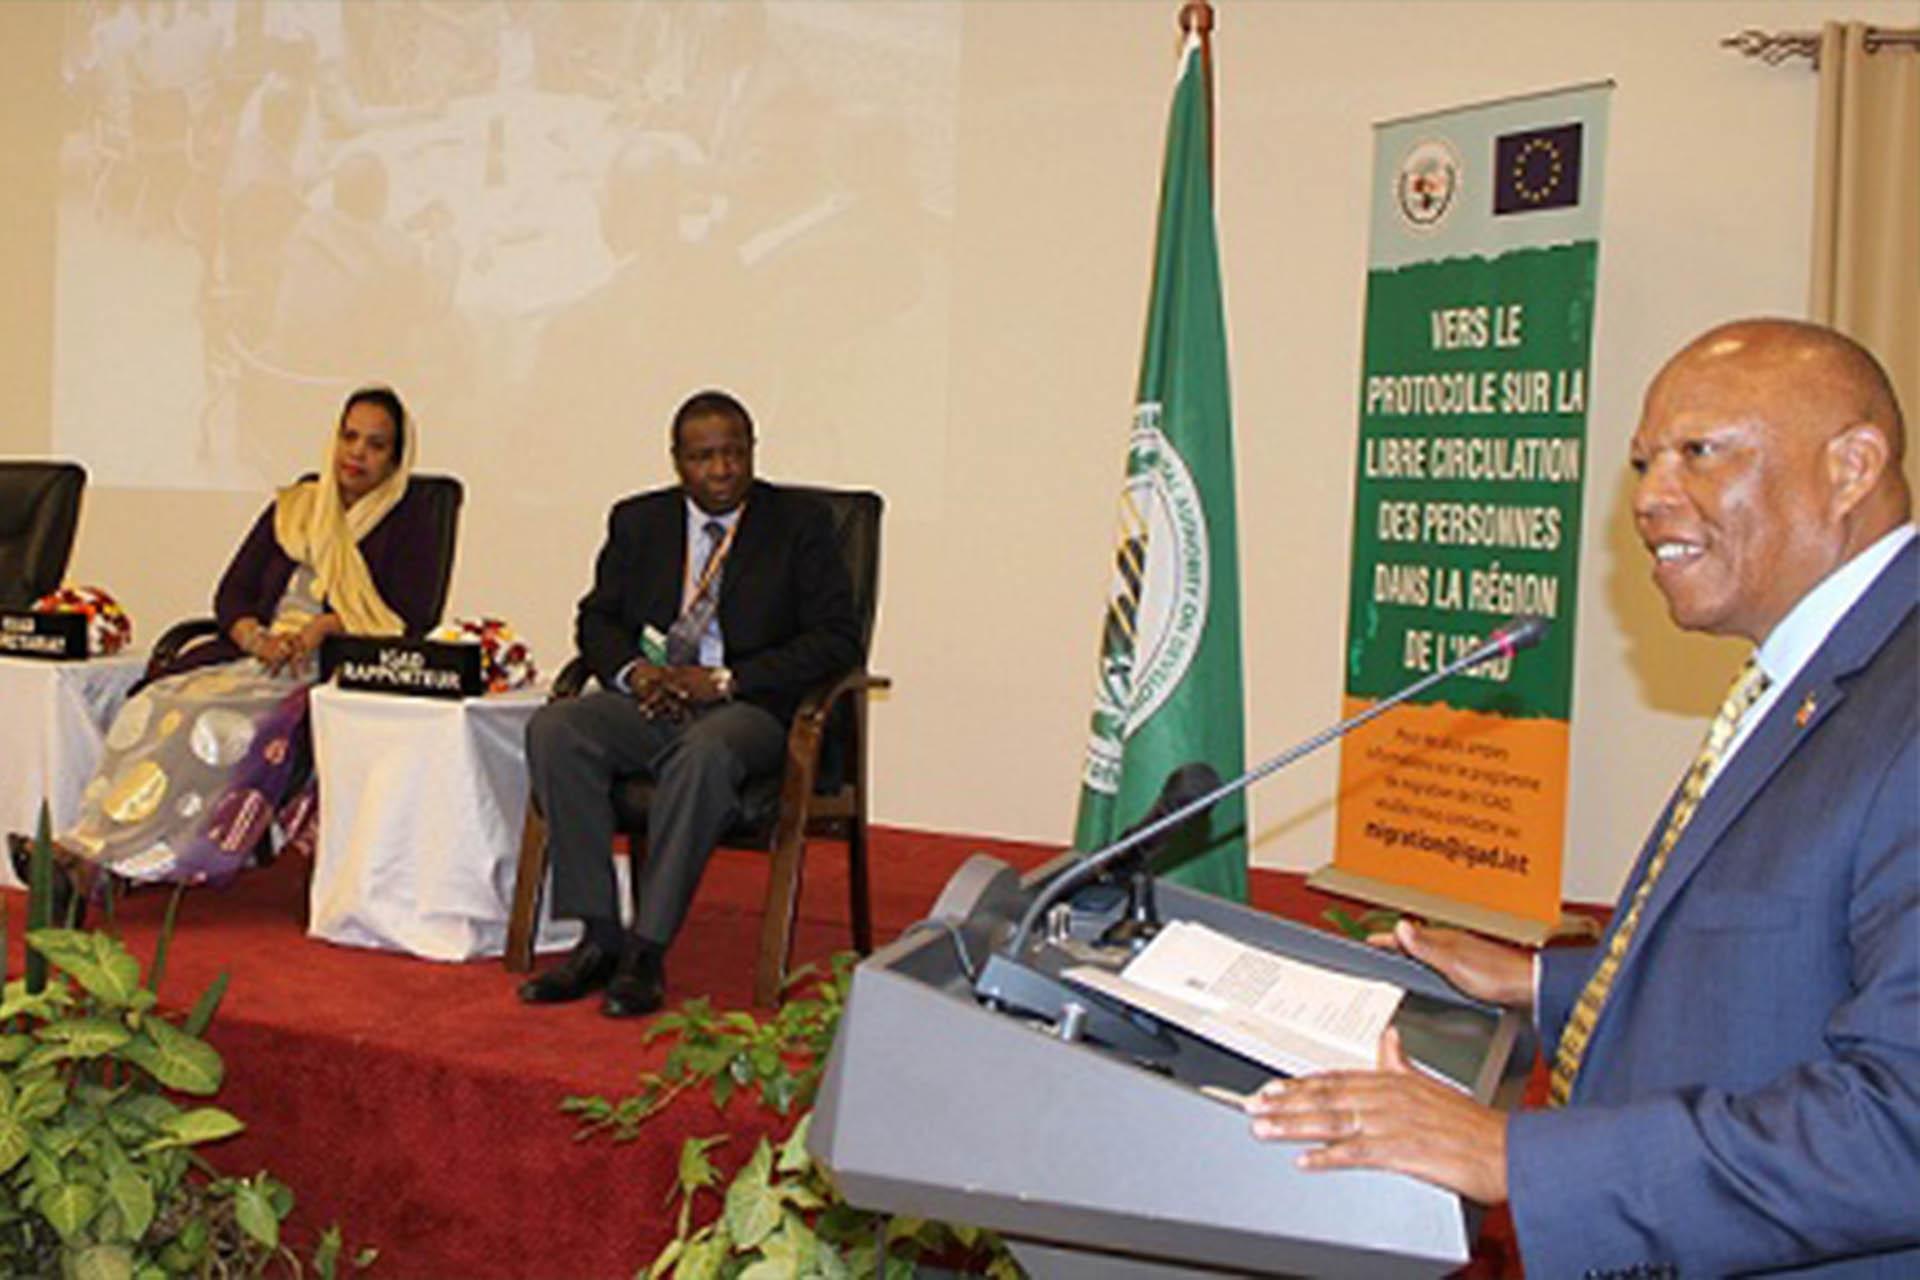 IGAD Member States to Finalise the Draft Protocol on Free Movement of Persons Next Month